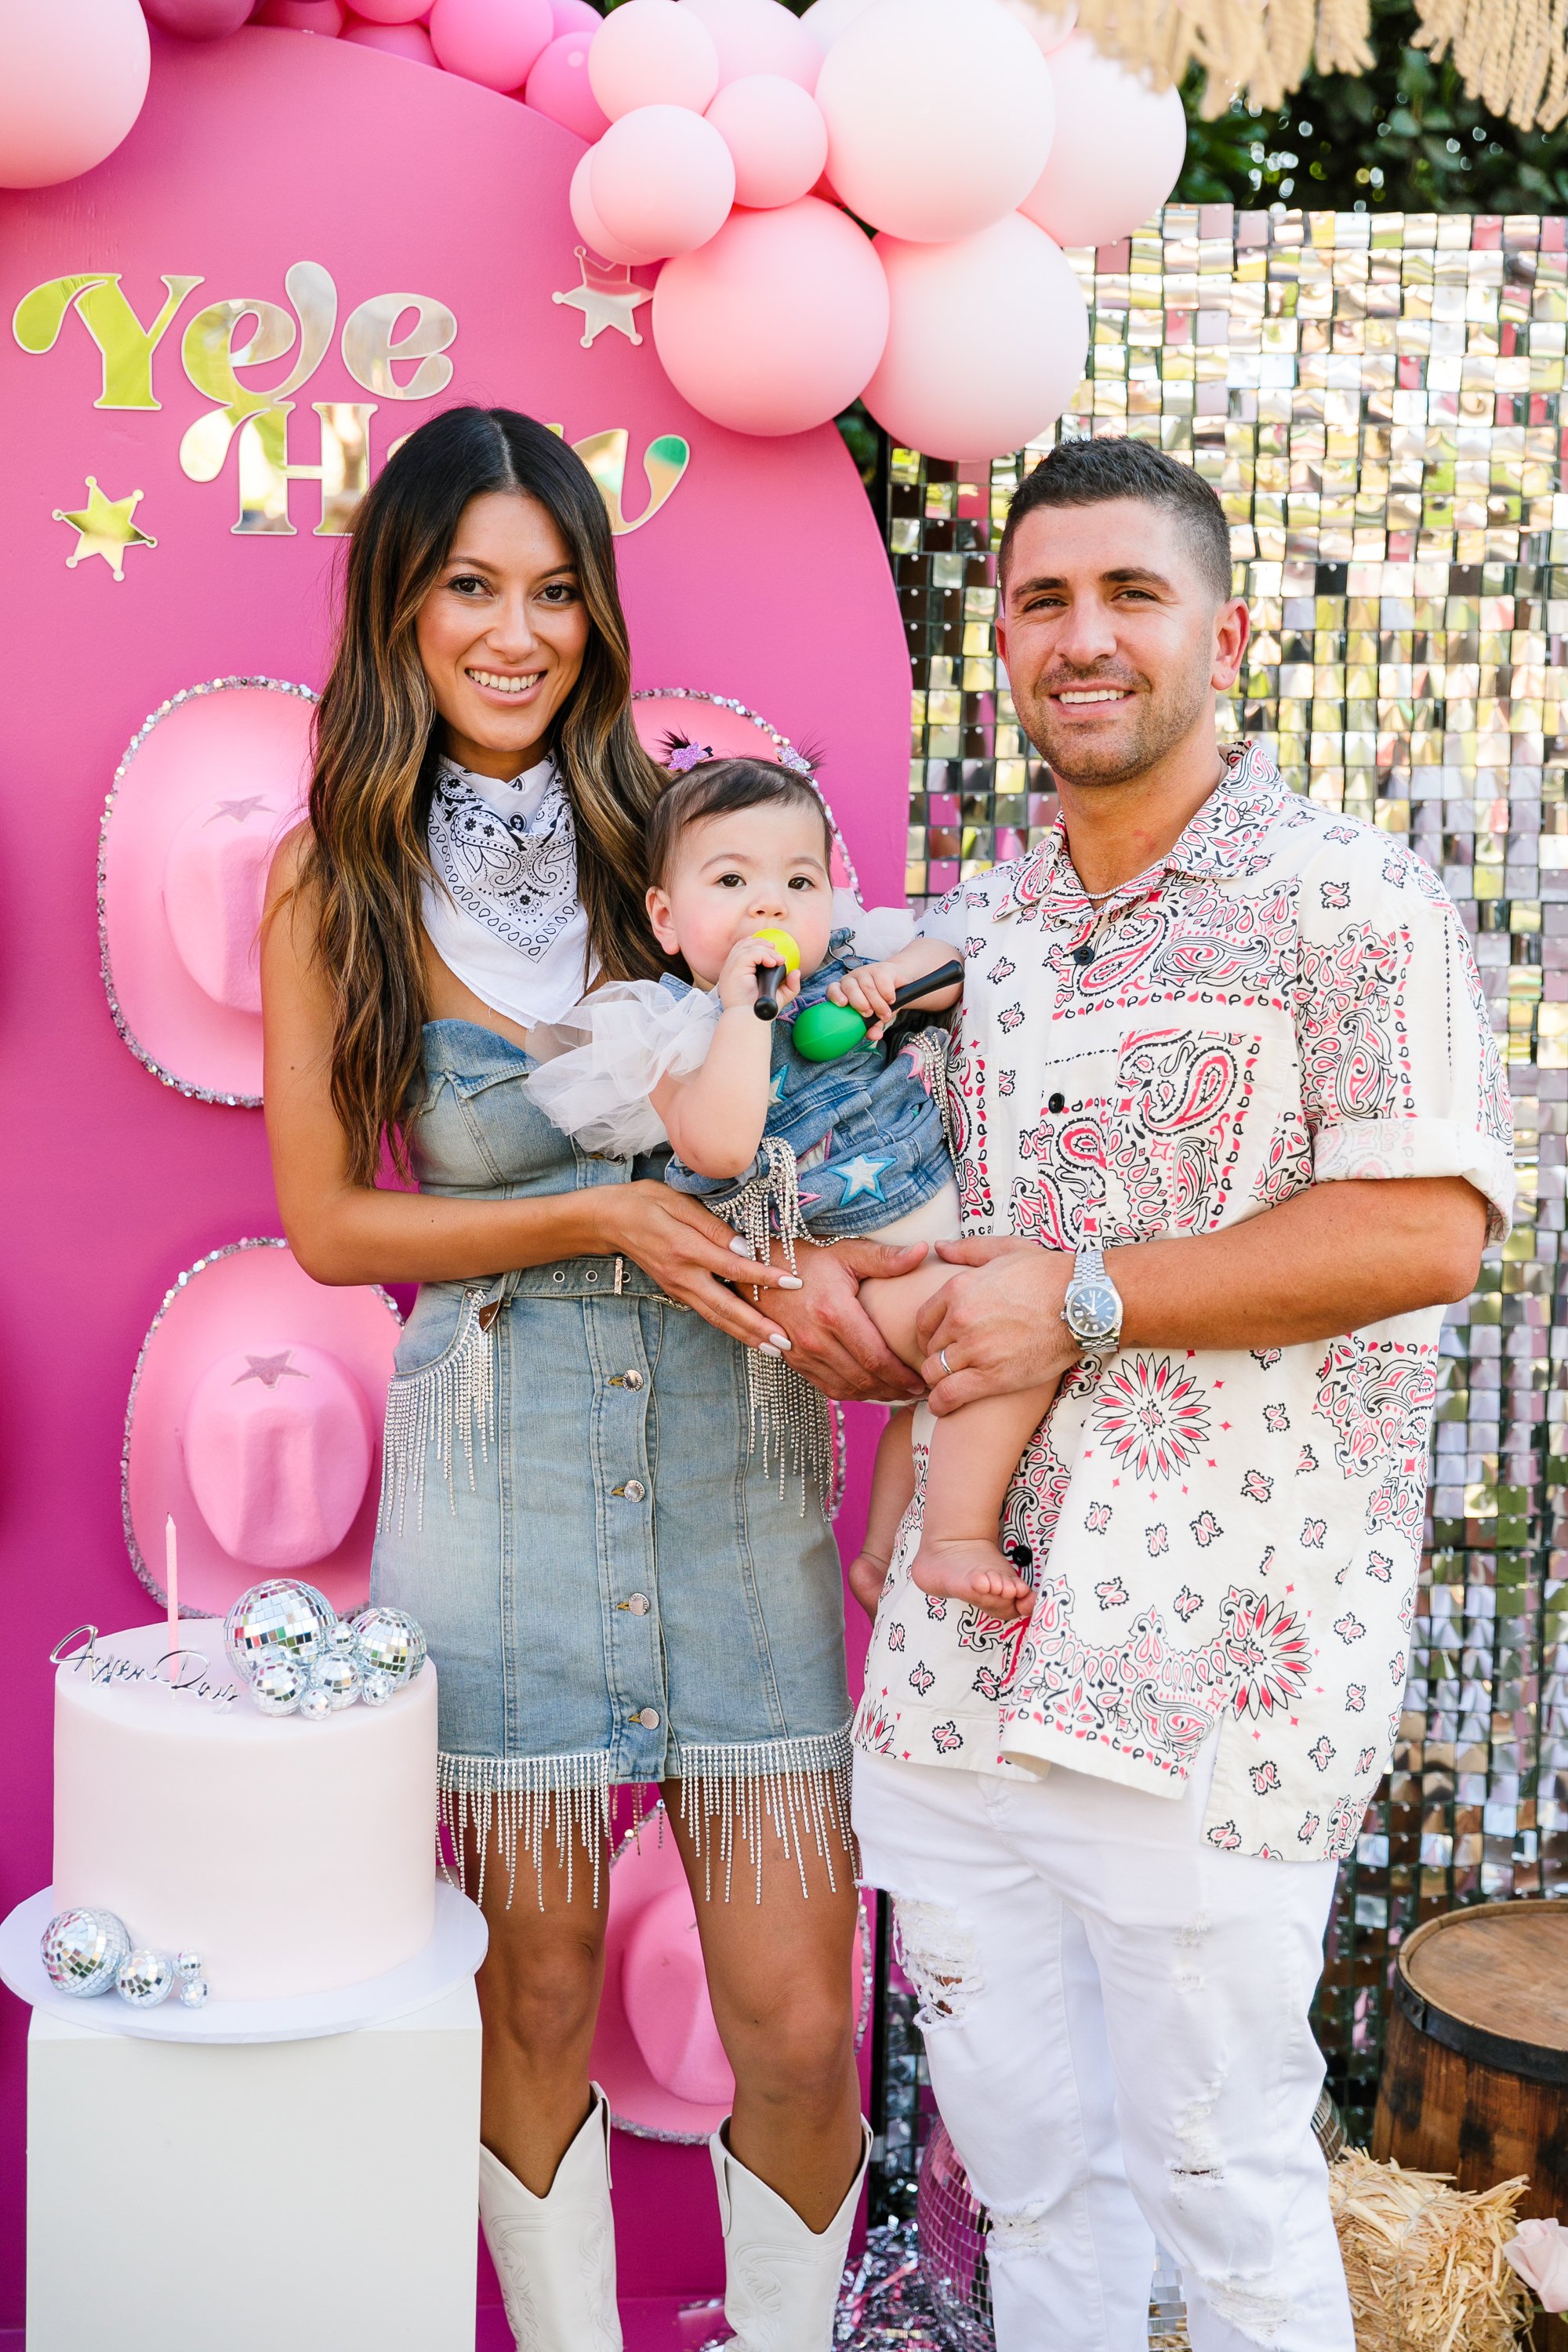 Los_Angeles_Party_Photographer_Luxury_Event_First_Birthday_Baby_Sherwood_Beverly_Hills_Cowboy_Disco_Theme_Girl_Child_Family_Photography-1413.jpg